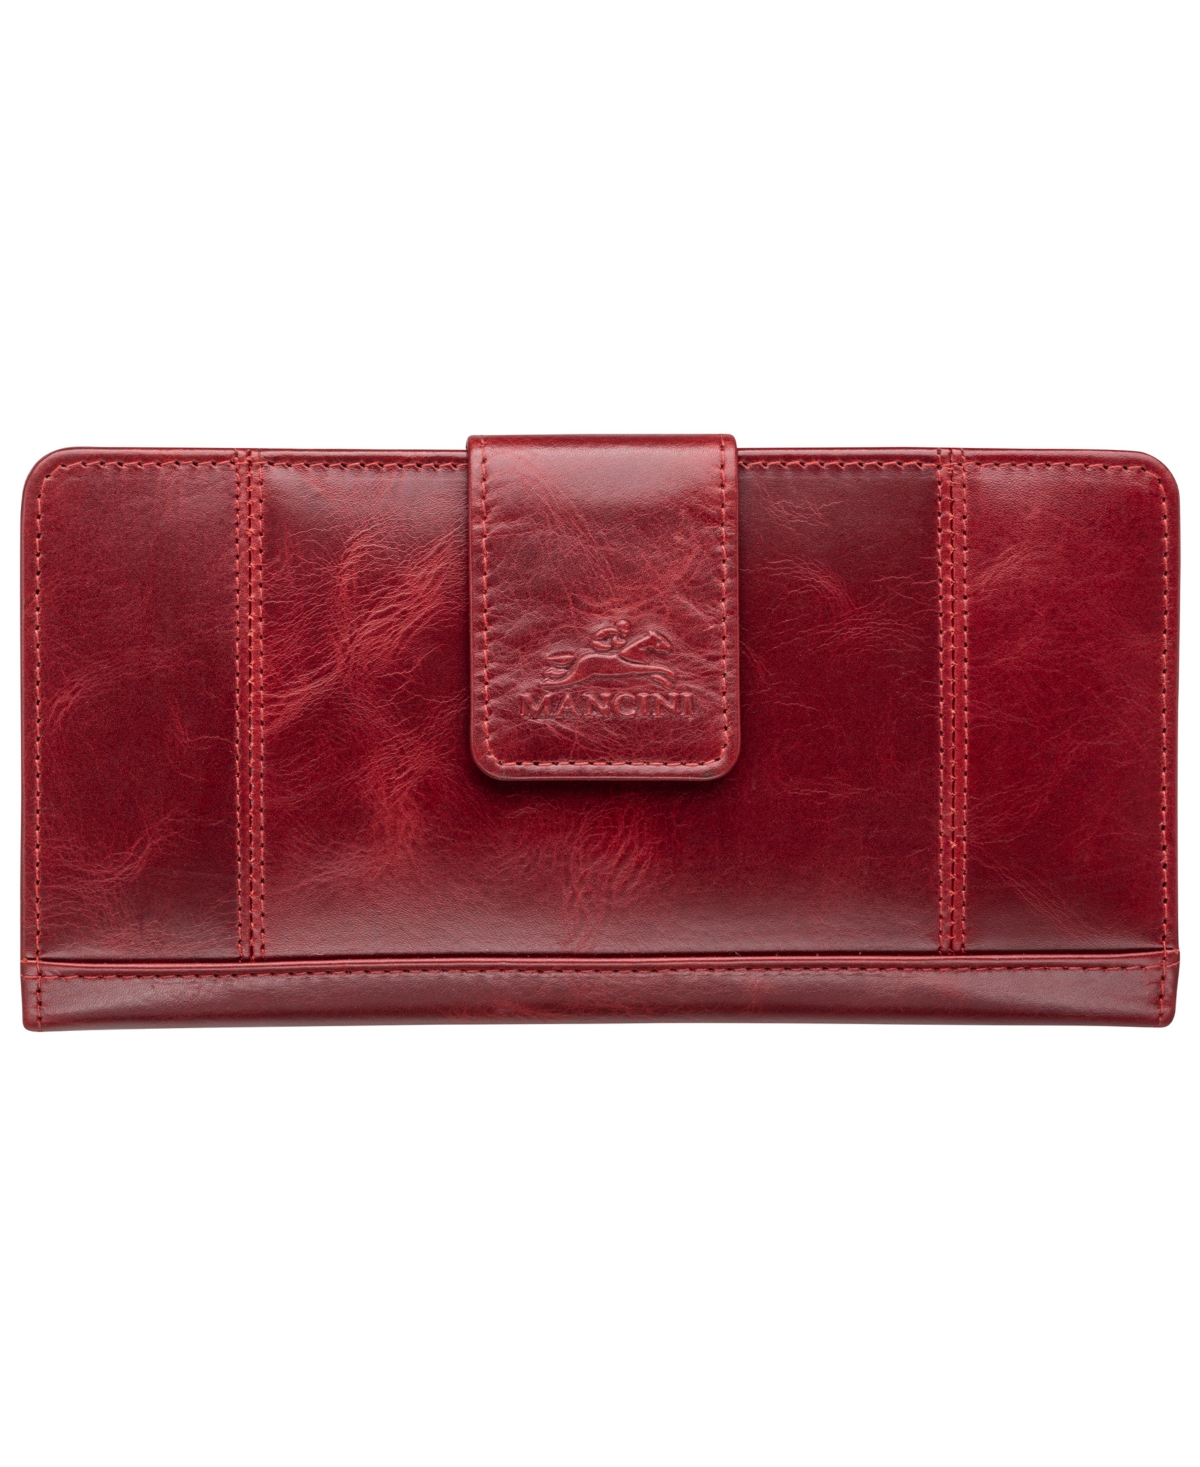 Mancini Men's Casablanca Collection Clutch Wallet In Red